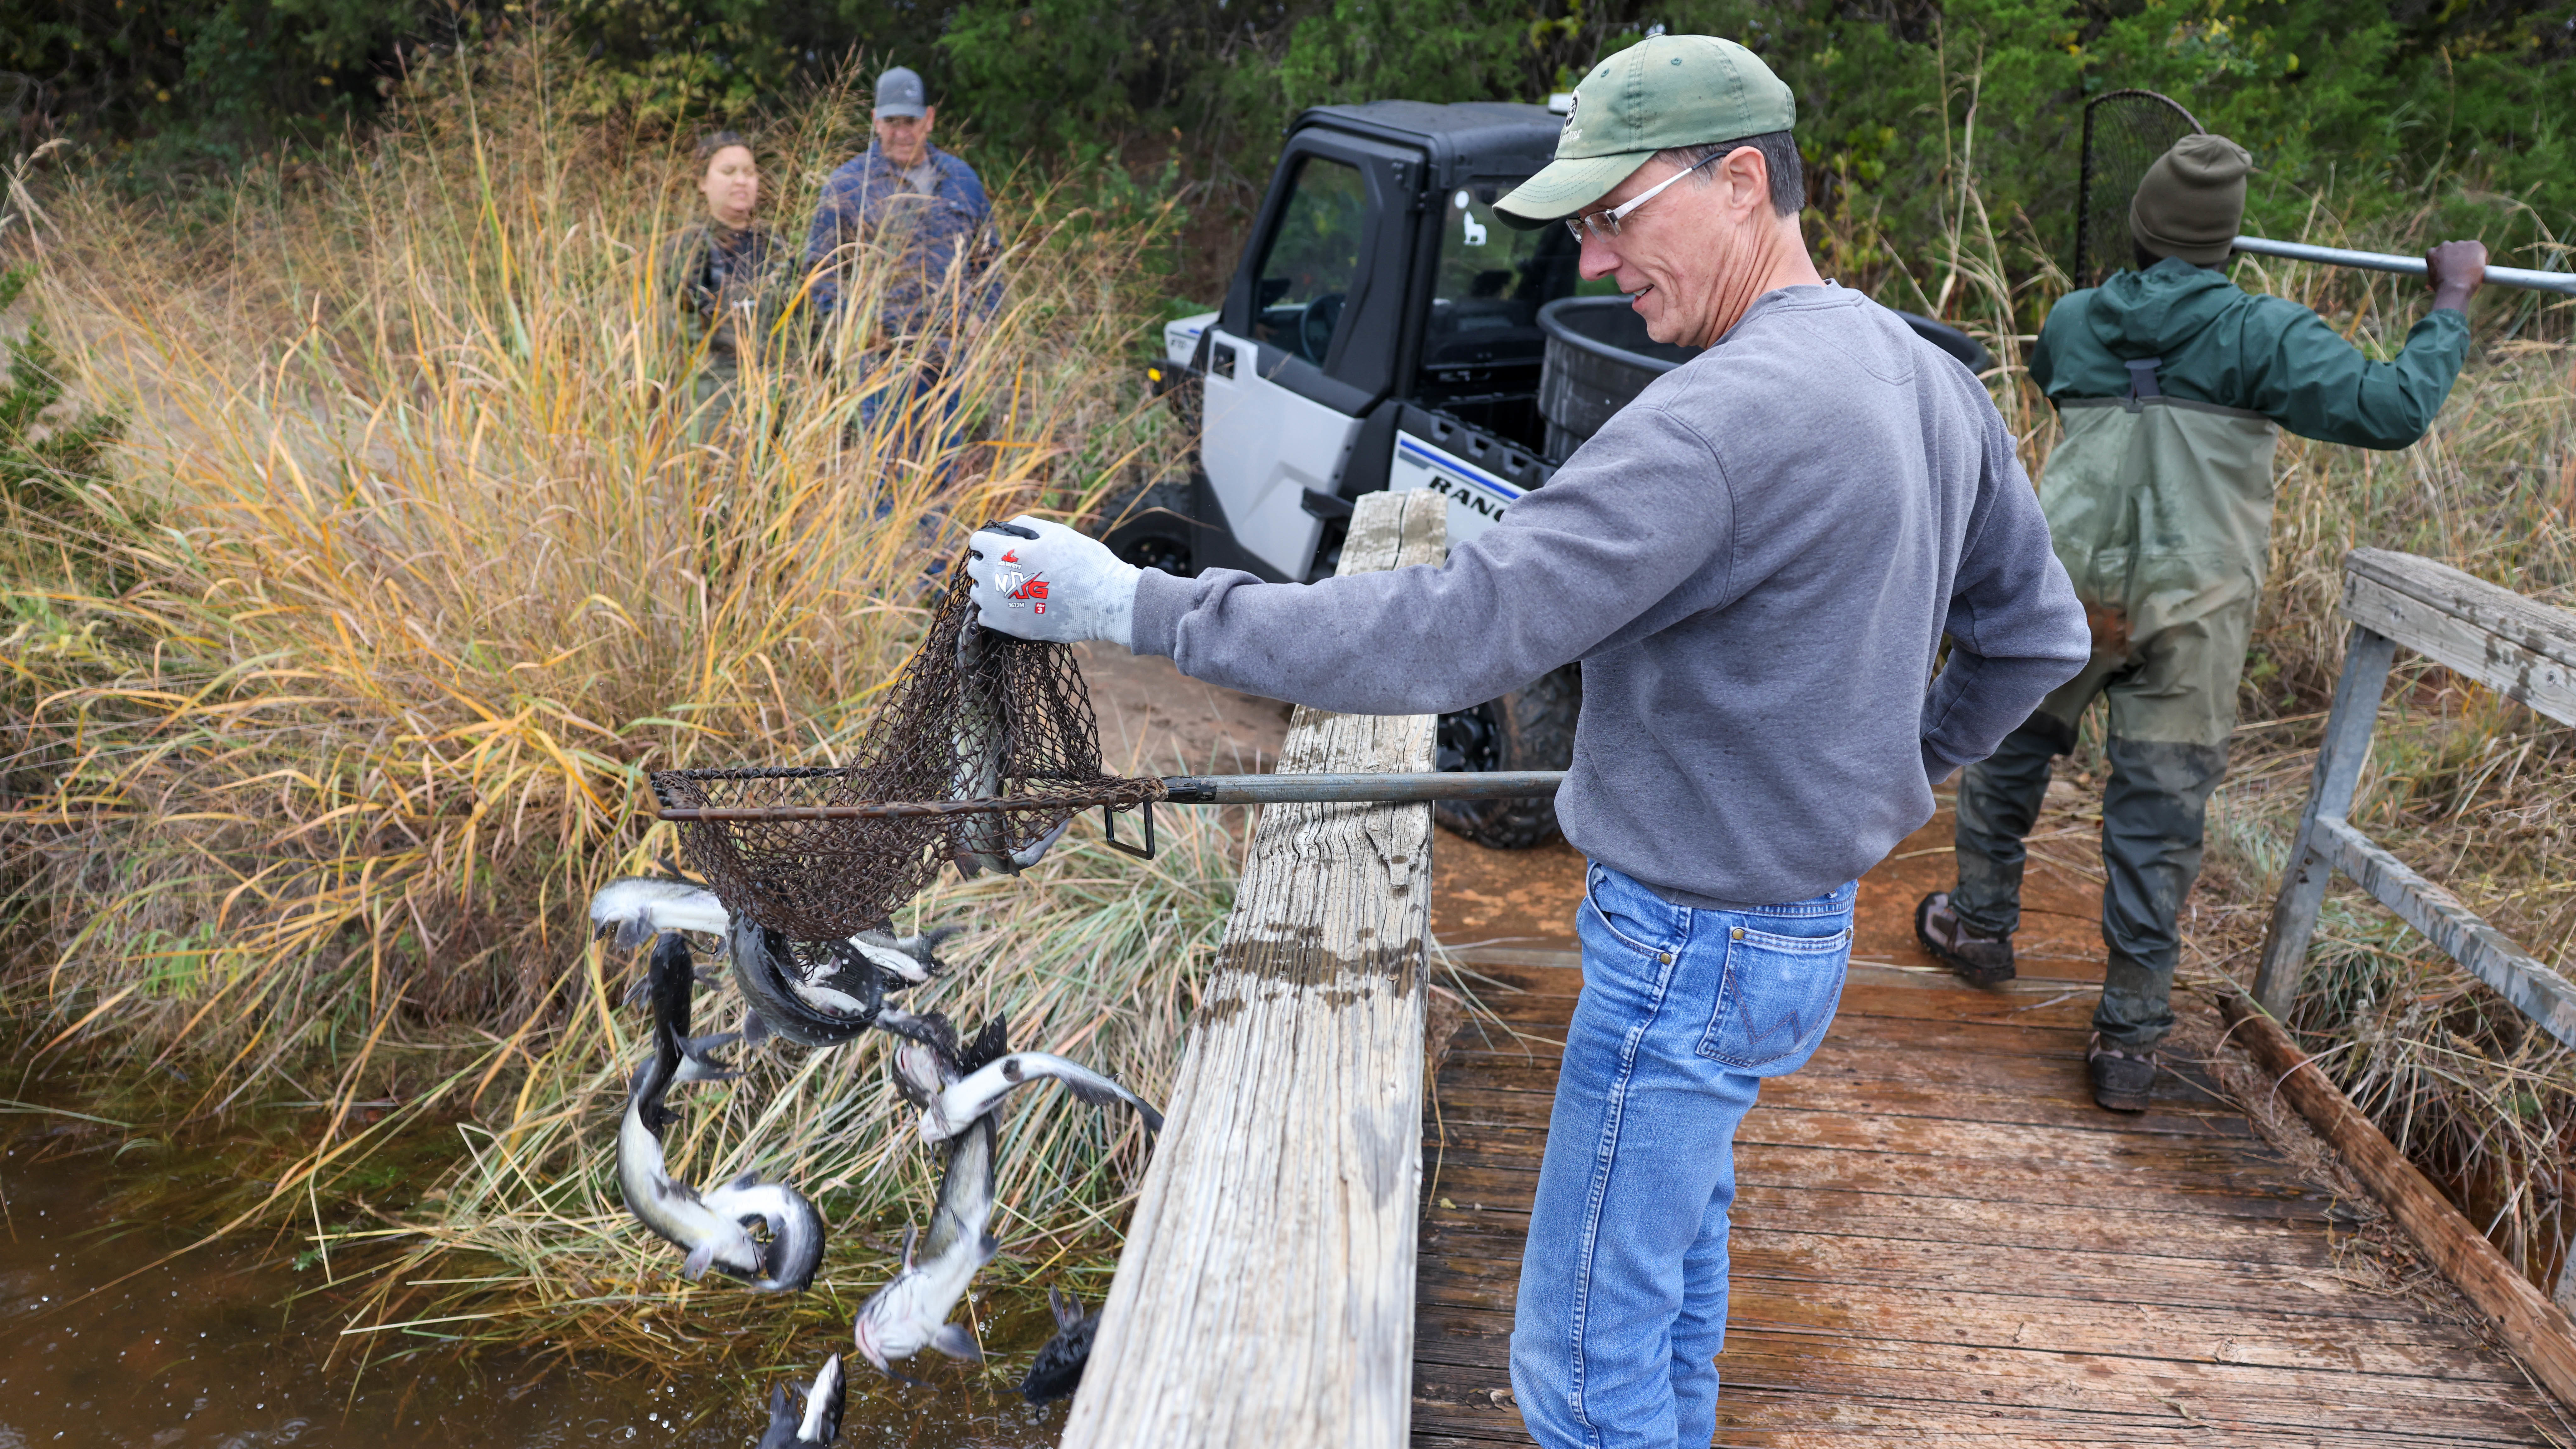 Base ponds restocked with catfish, trout ahead of Winter season